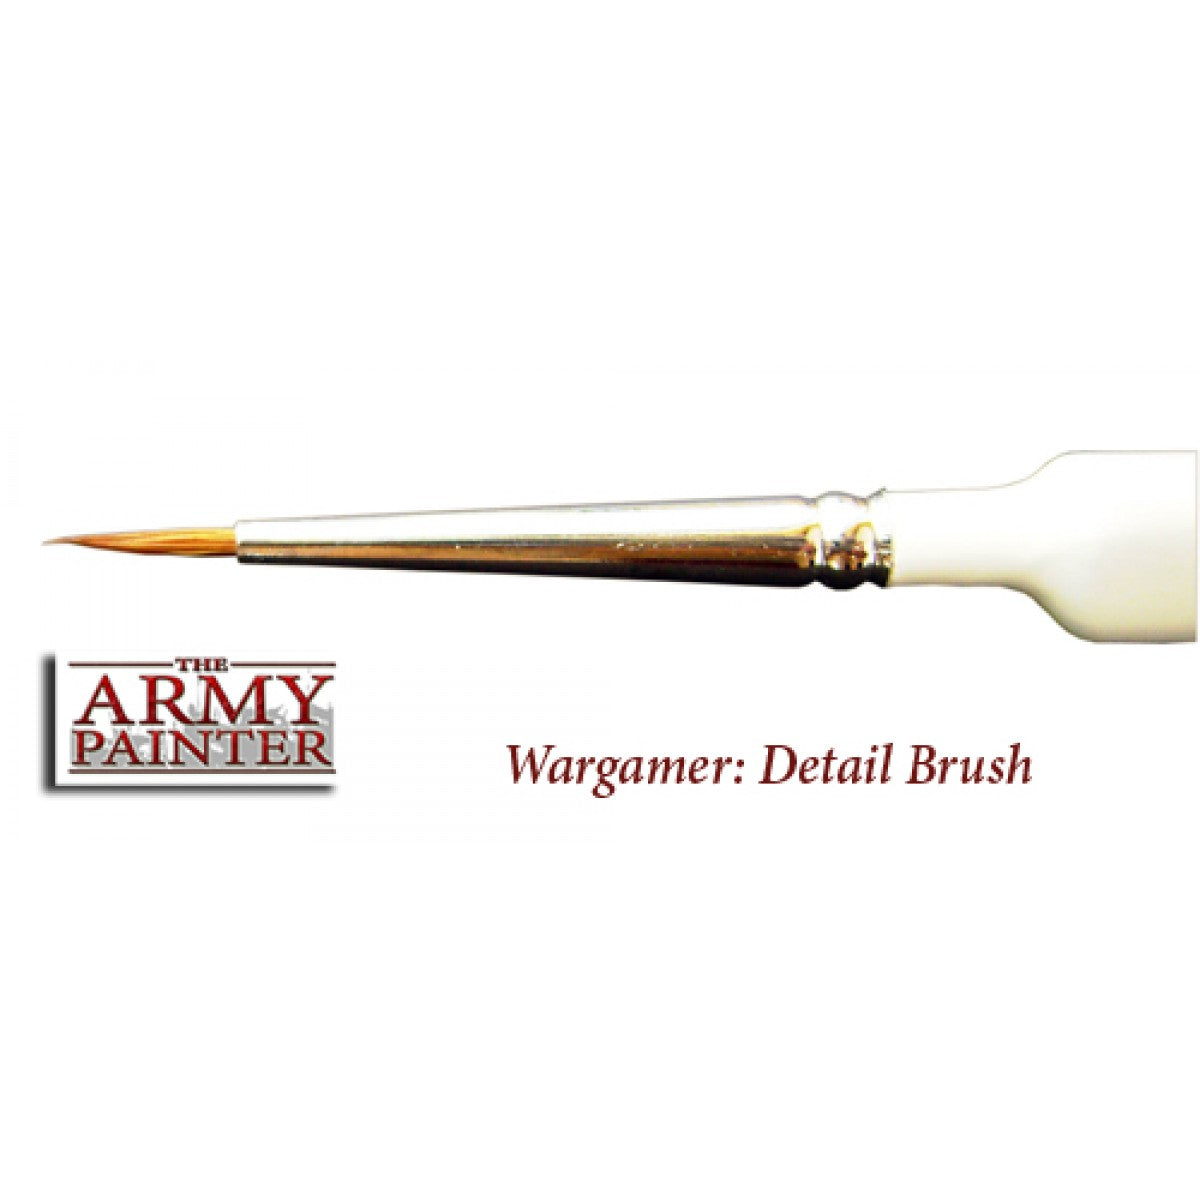 Army Painter BR7005 Wargamer: Detail Brush The Army Painter PAINT, BRUSHES & SUPPLIES